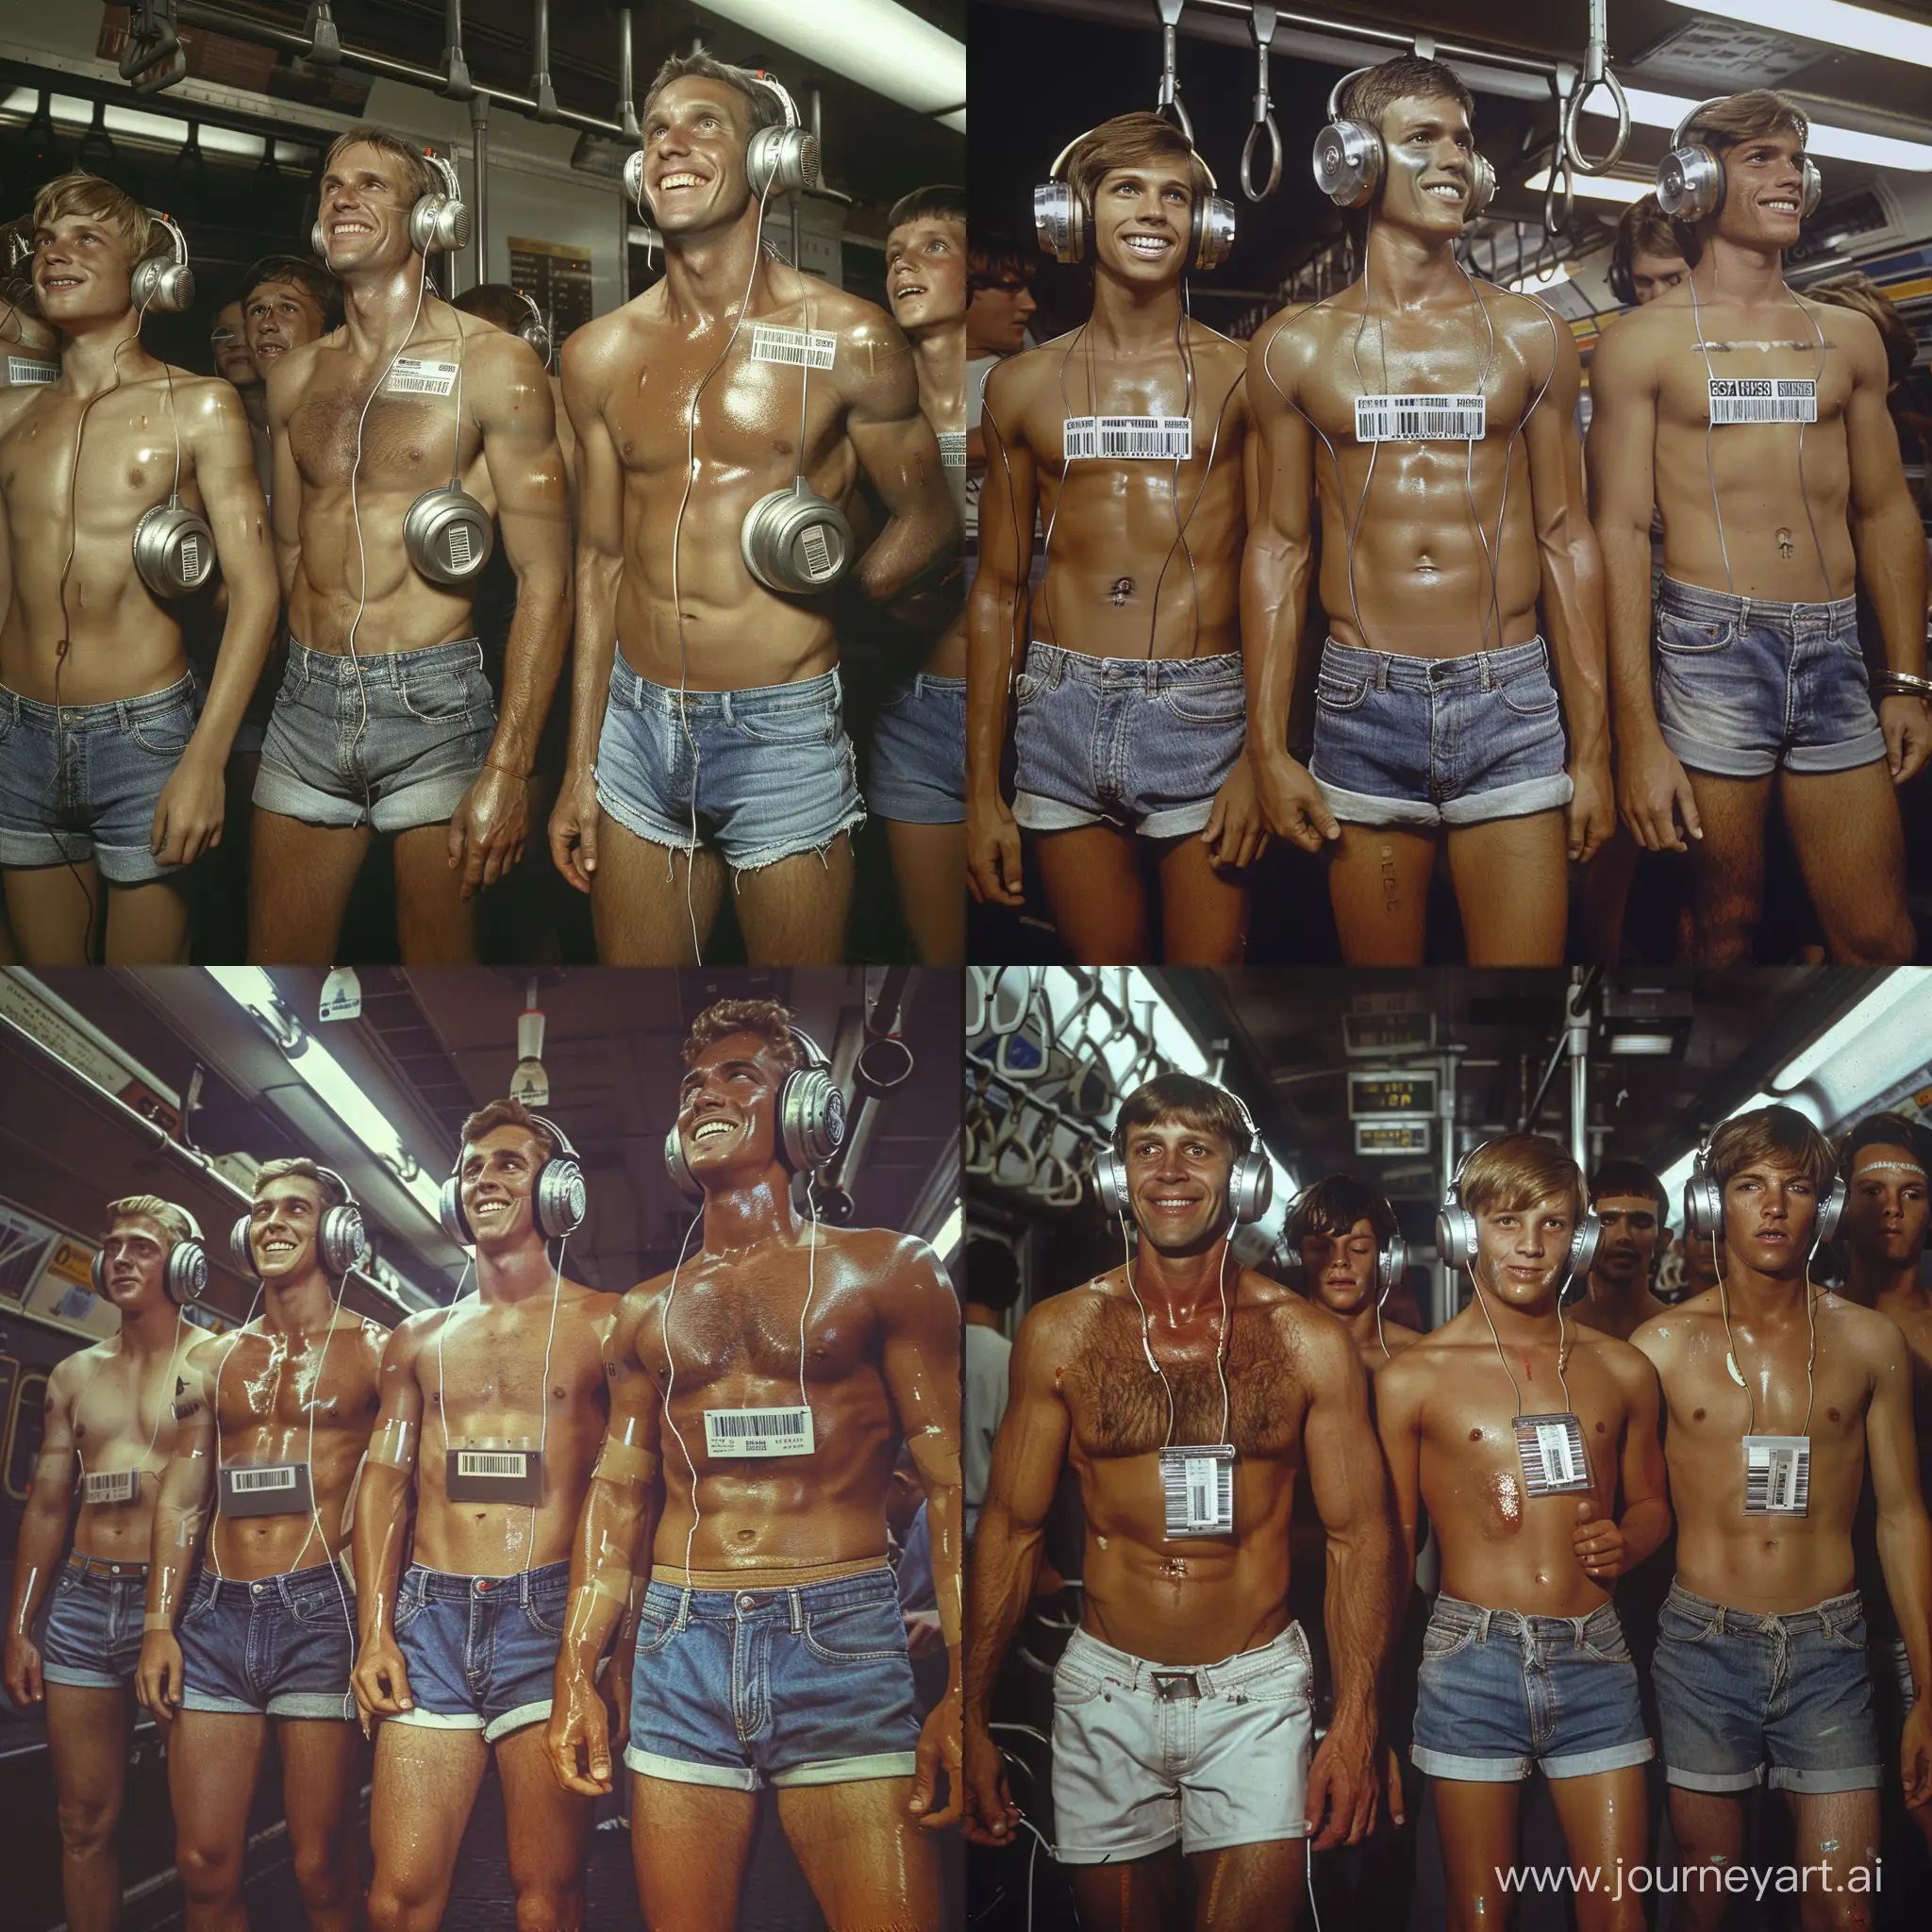 Handsome muscular middle-aged men and handsome muscular college-age boys each wear silver headphones and fitted denim cutoff shorts, dazed smiles, small barcode attached to each man's chest, 1970s New York subway setting, facing the viewer, mass indoctrination, color image, hyperrealistic, cinematic
